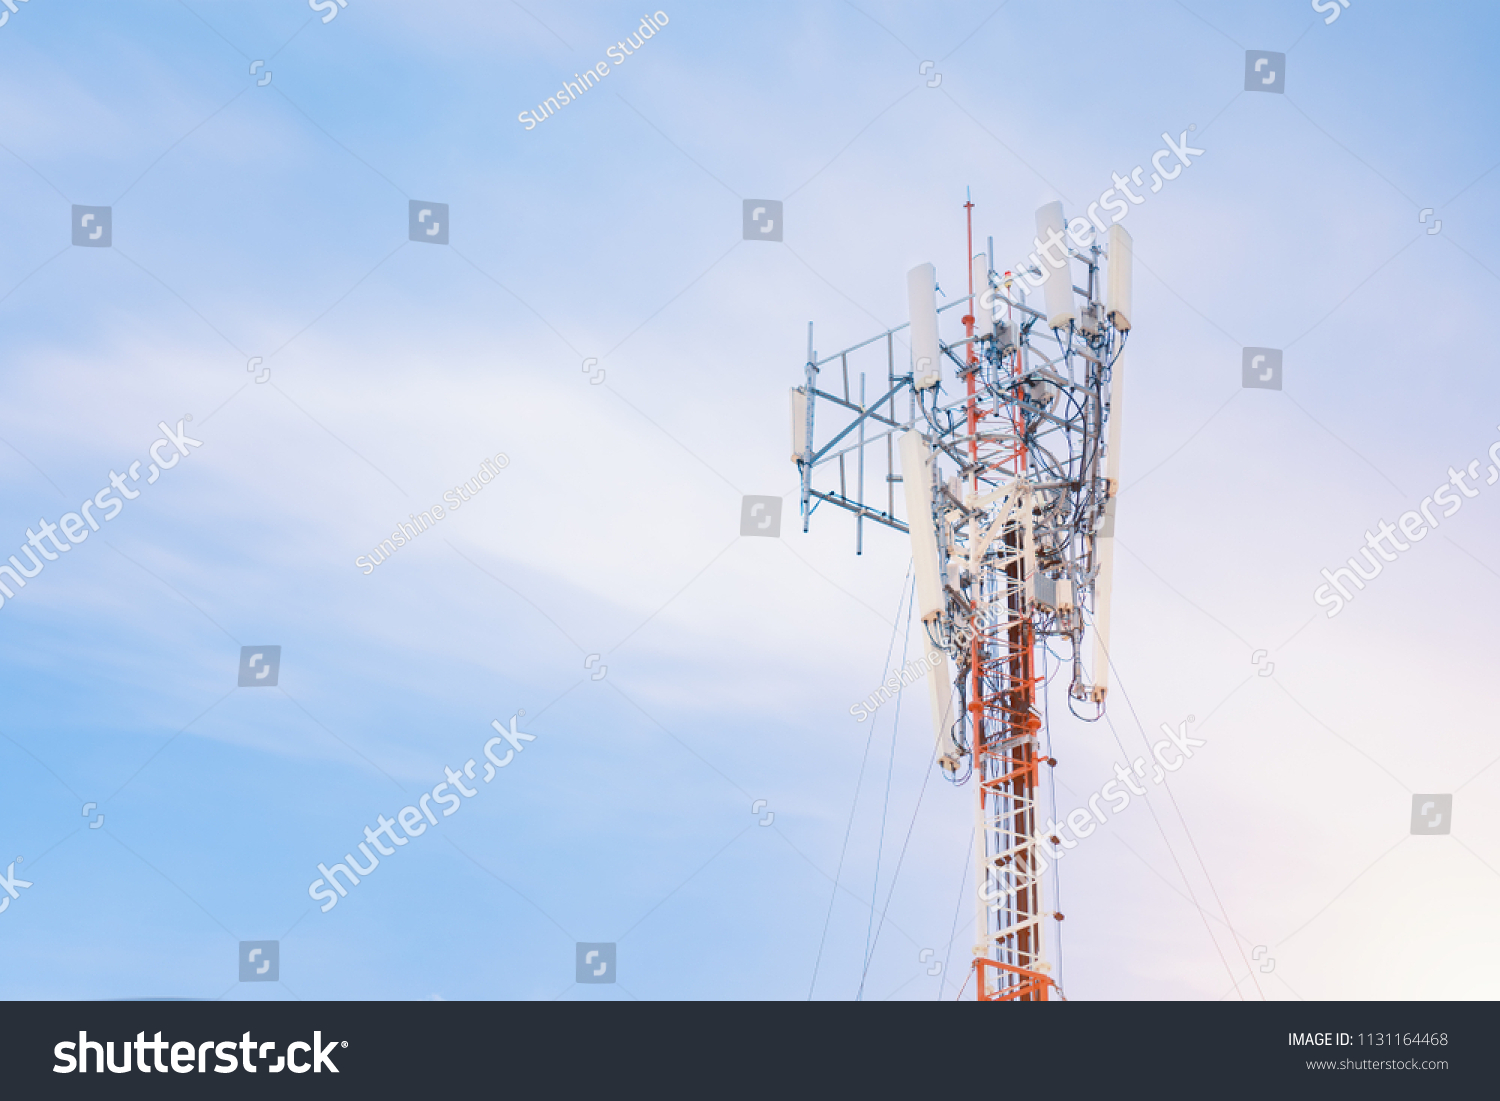 Telecommunication (5G,4G) post with copy space.Cellular telephone network.
Signaling station.Development of communication in city.Digital wireless connection system.Antenna. Technology #1131164468